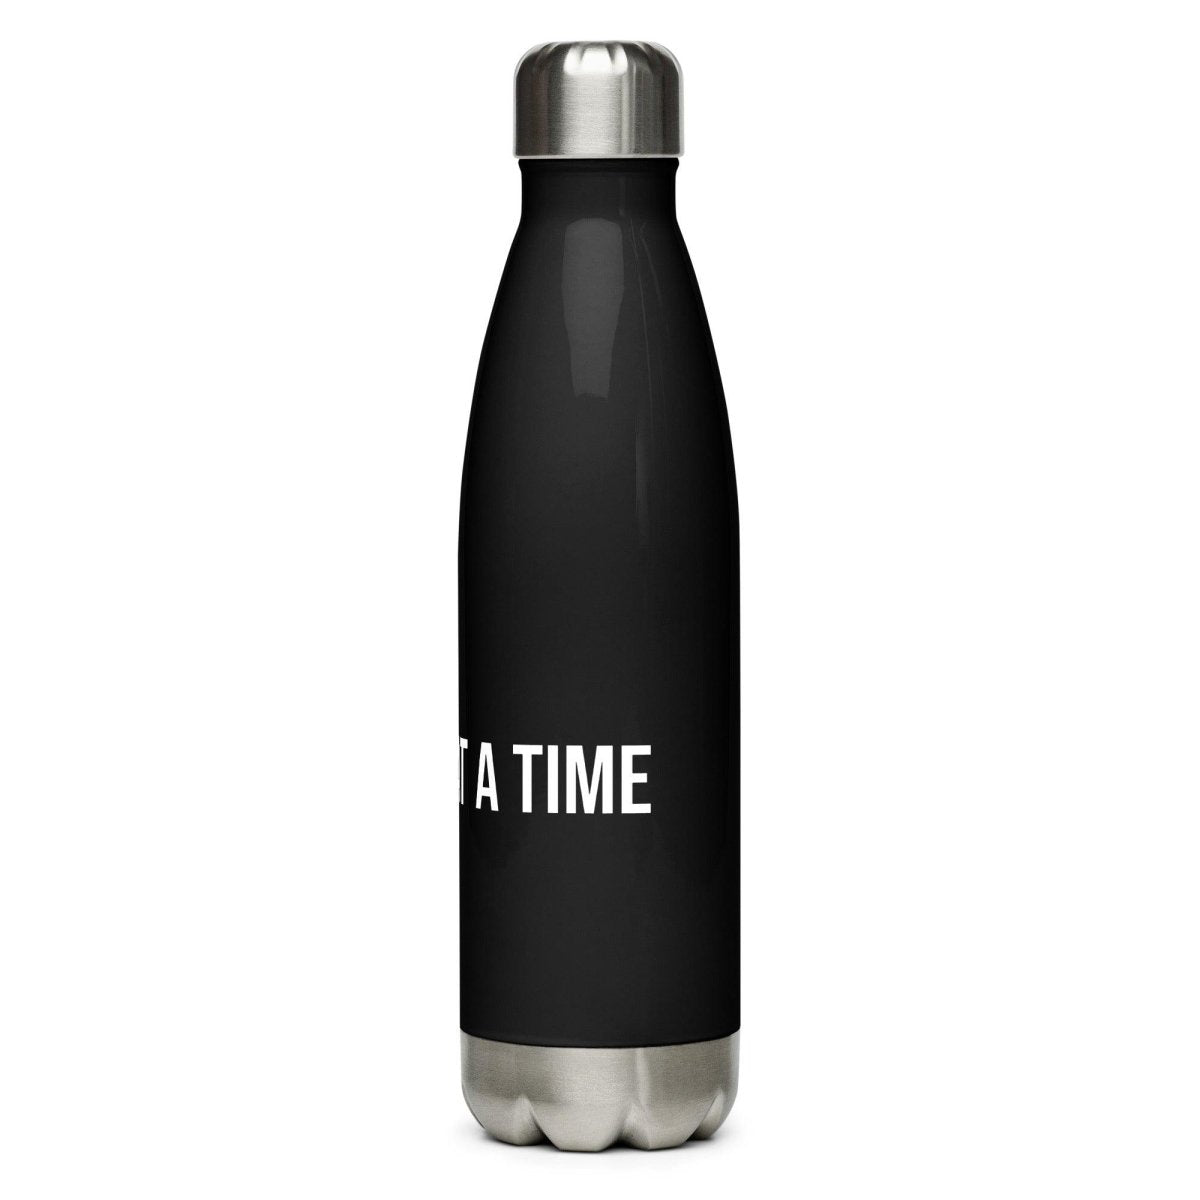 Stay Hydrated with Style White Stainless Steel Water Bottle with One Day at a Time Design The Perfect Gift for Those in Recovery or Embracing Sobriety - Clean & Sober